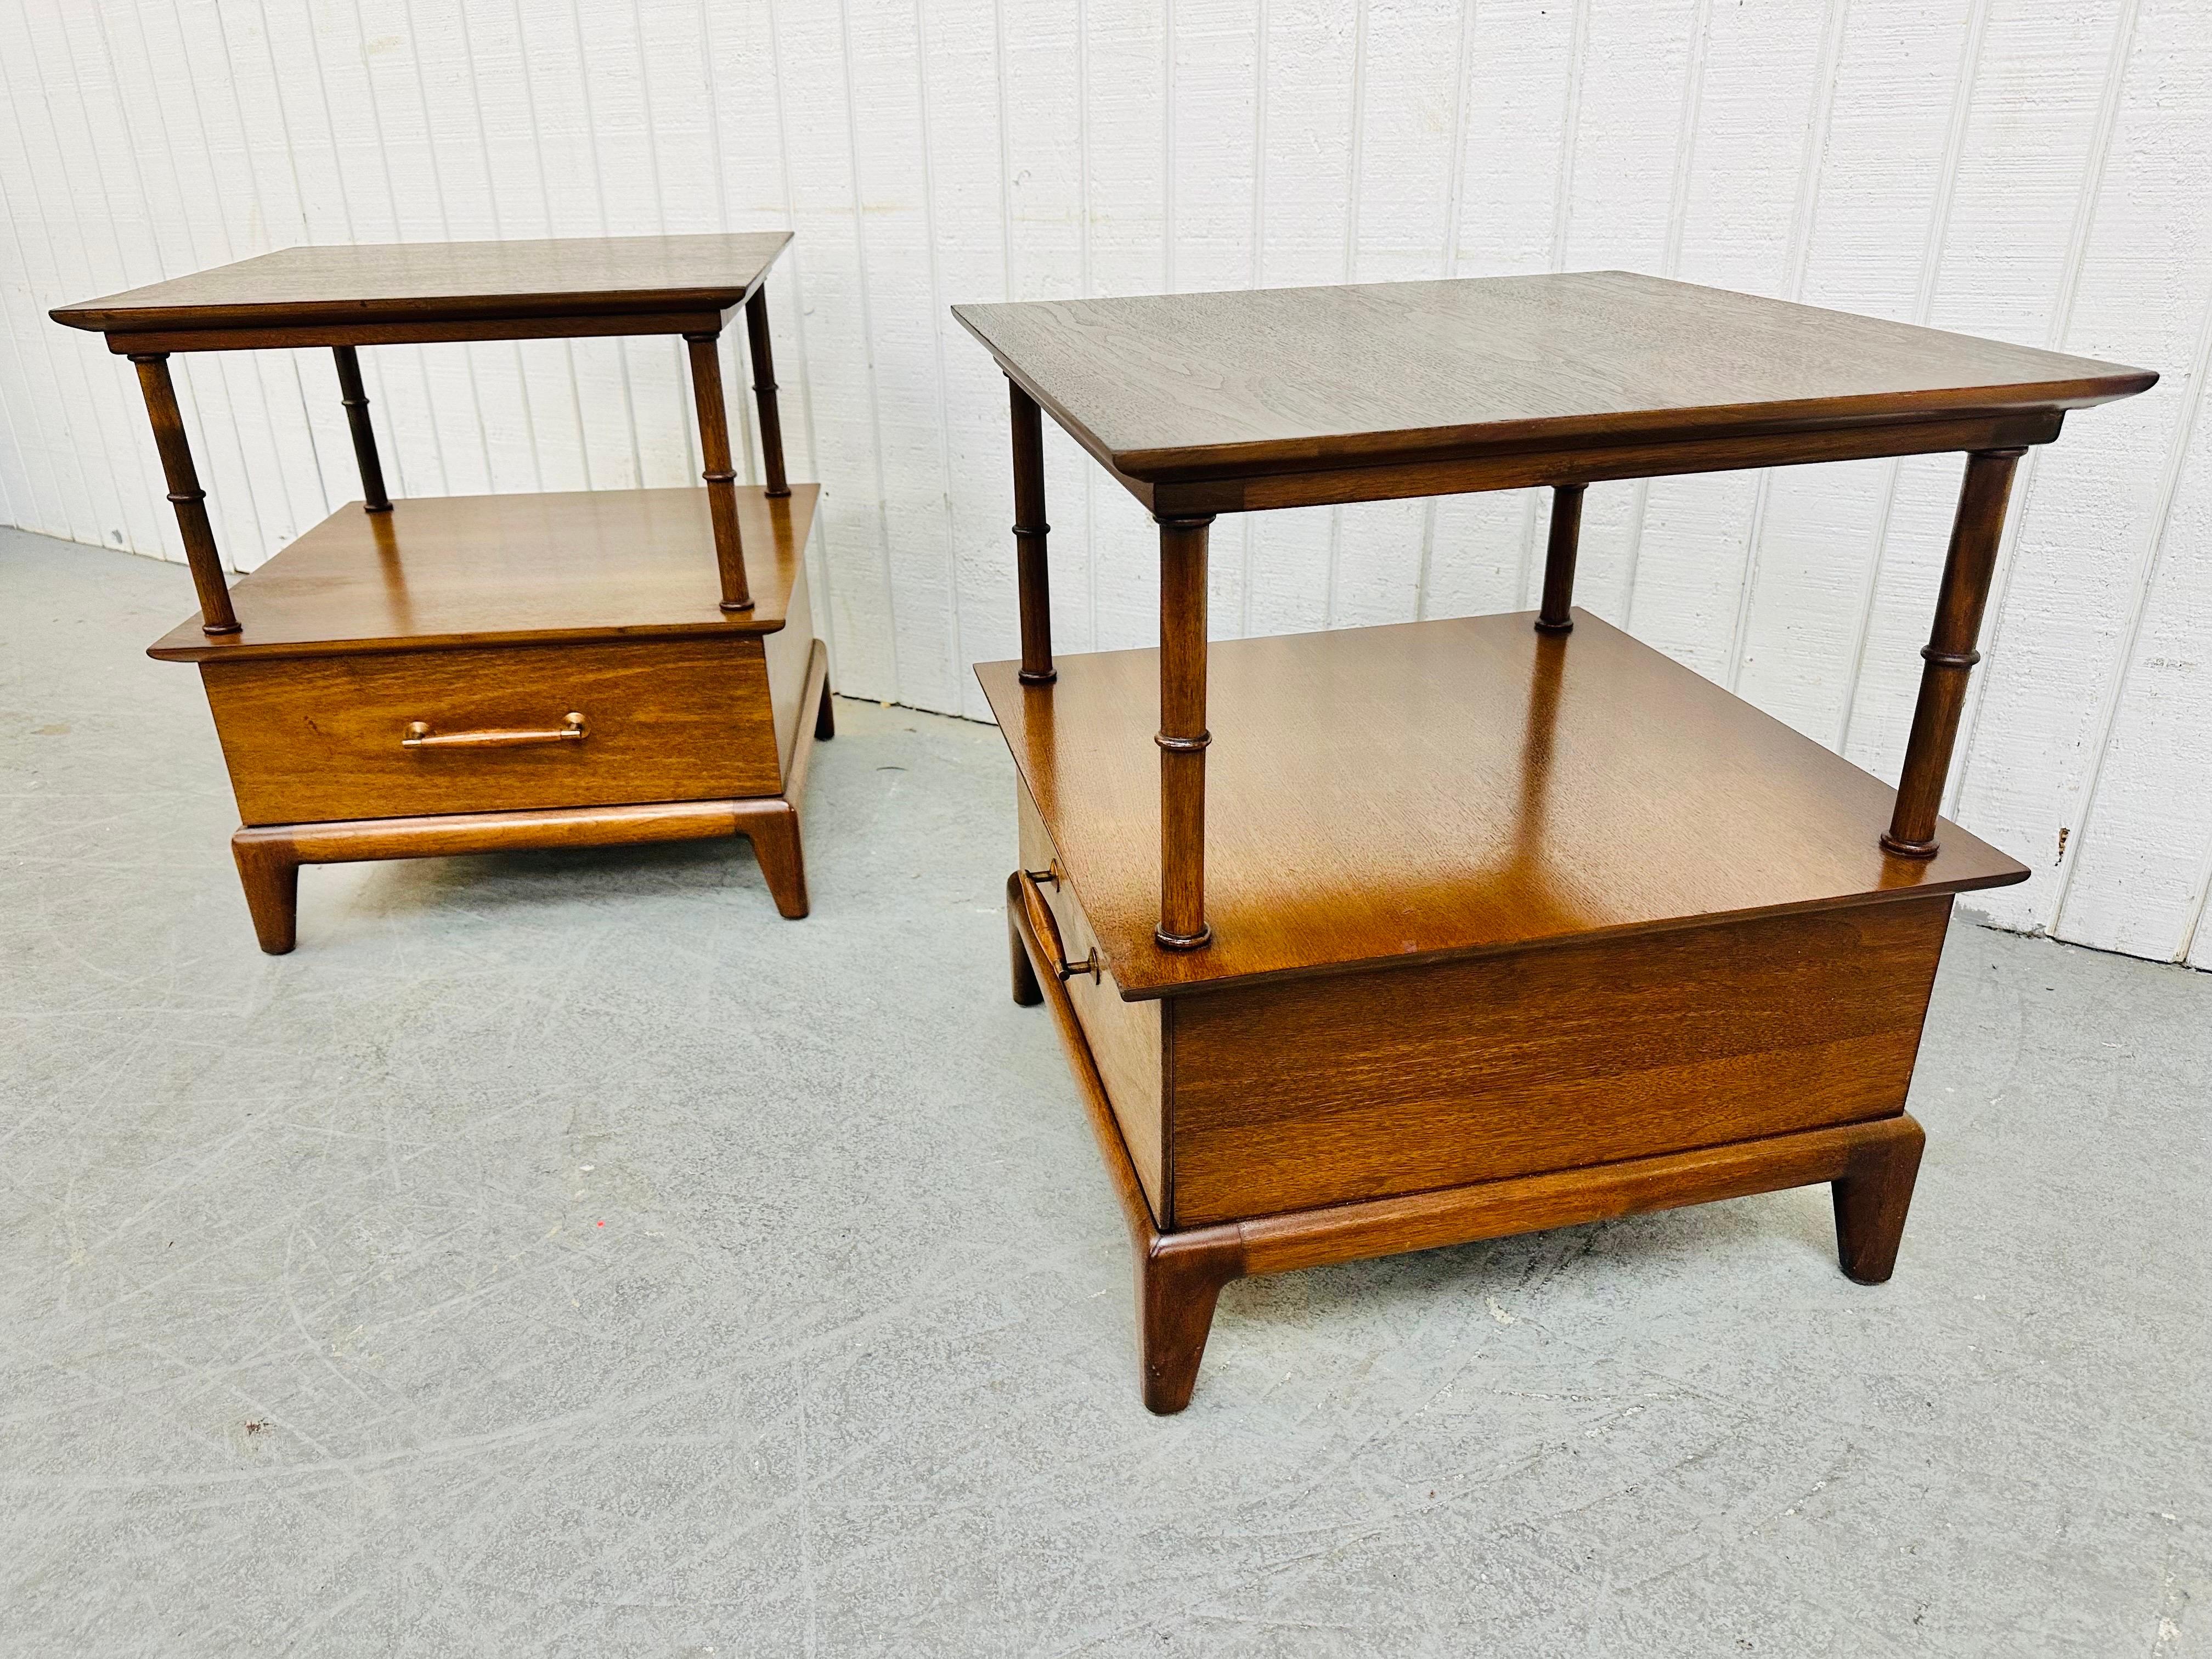 This listing is for a pair Mid-Century Modern Henredon Walnut Nightstands. Featuring a straight line double tier design, rectangular tops, a single drawer for storage, wooden pulls, and a beautiful walnut finish. This is an exceptional combination